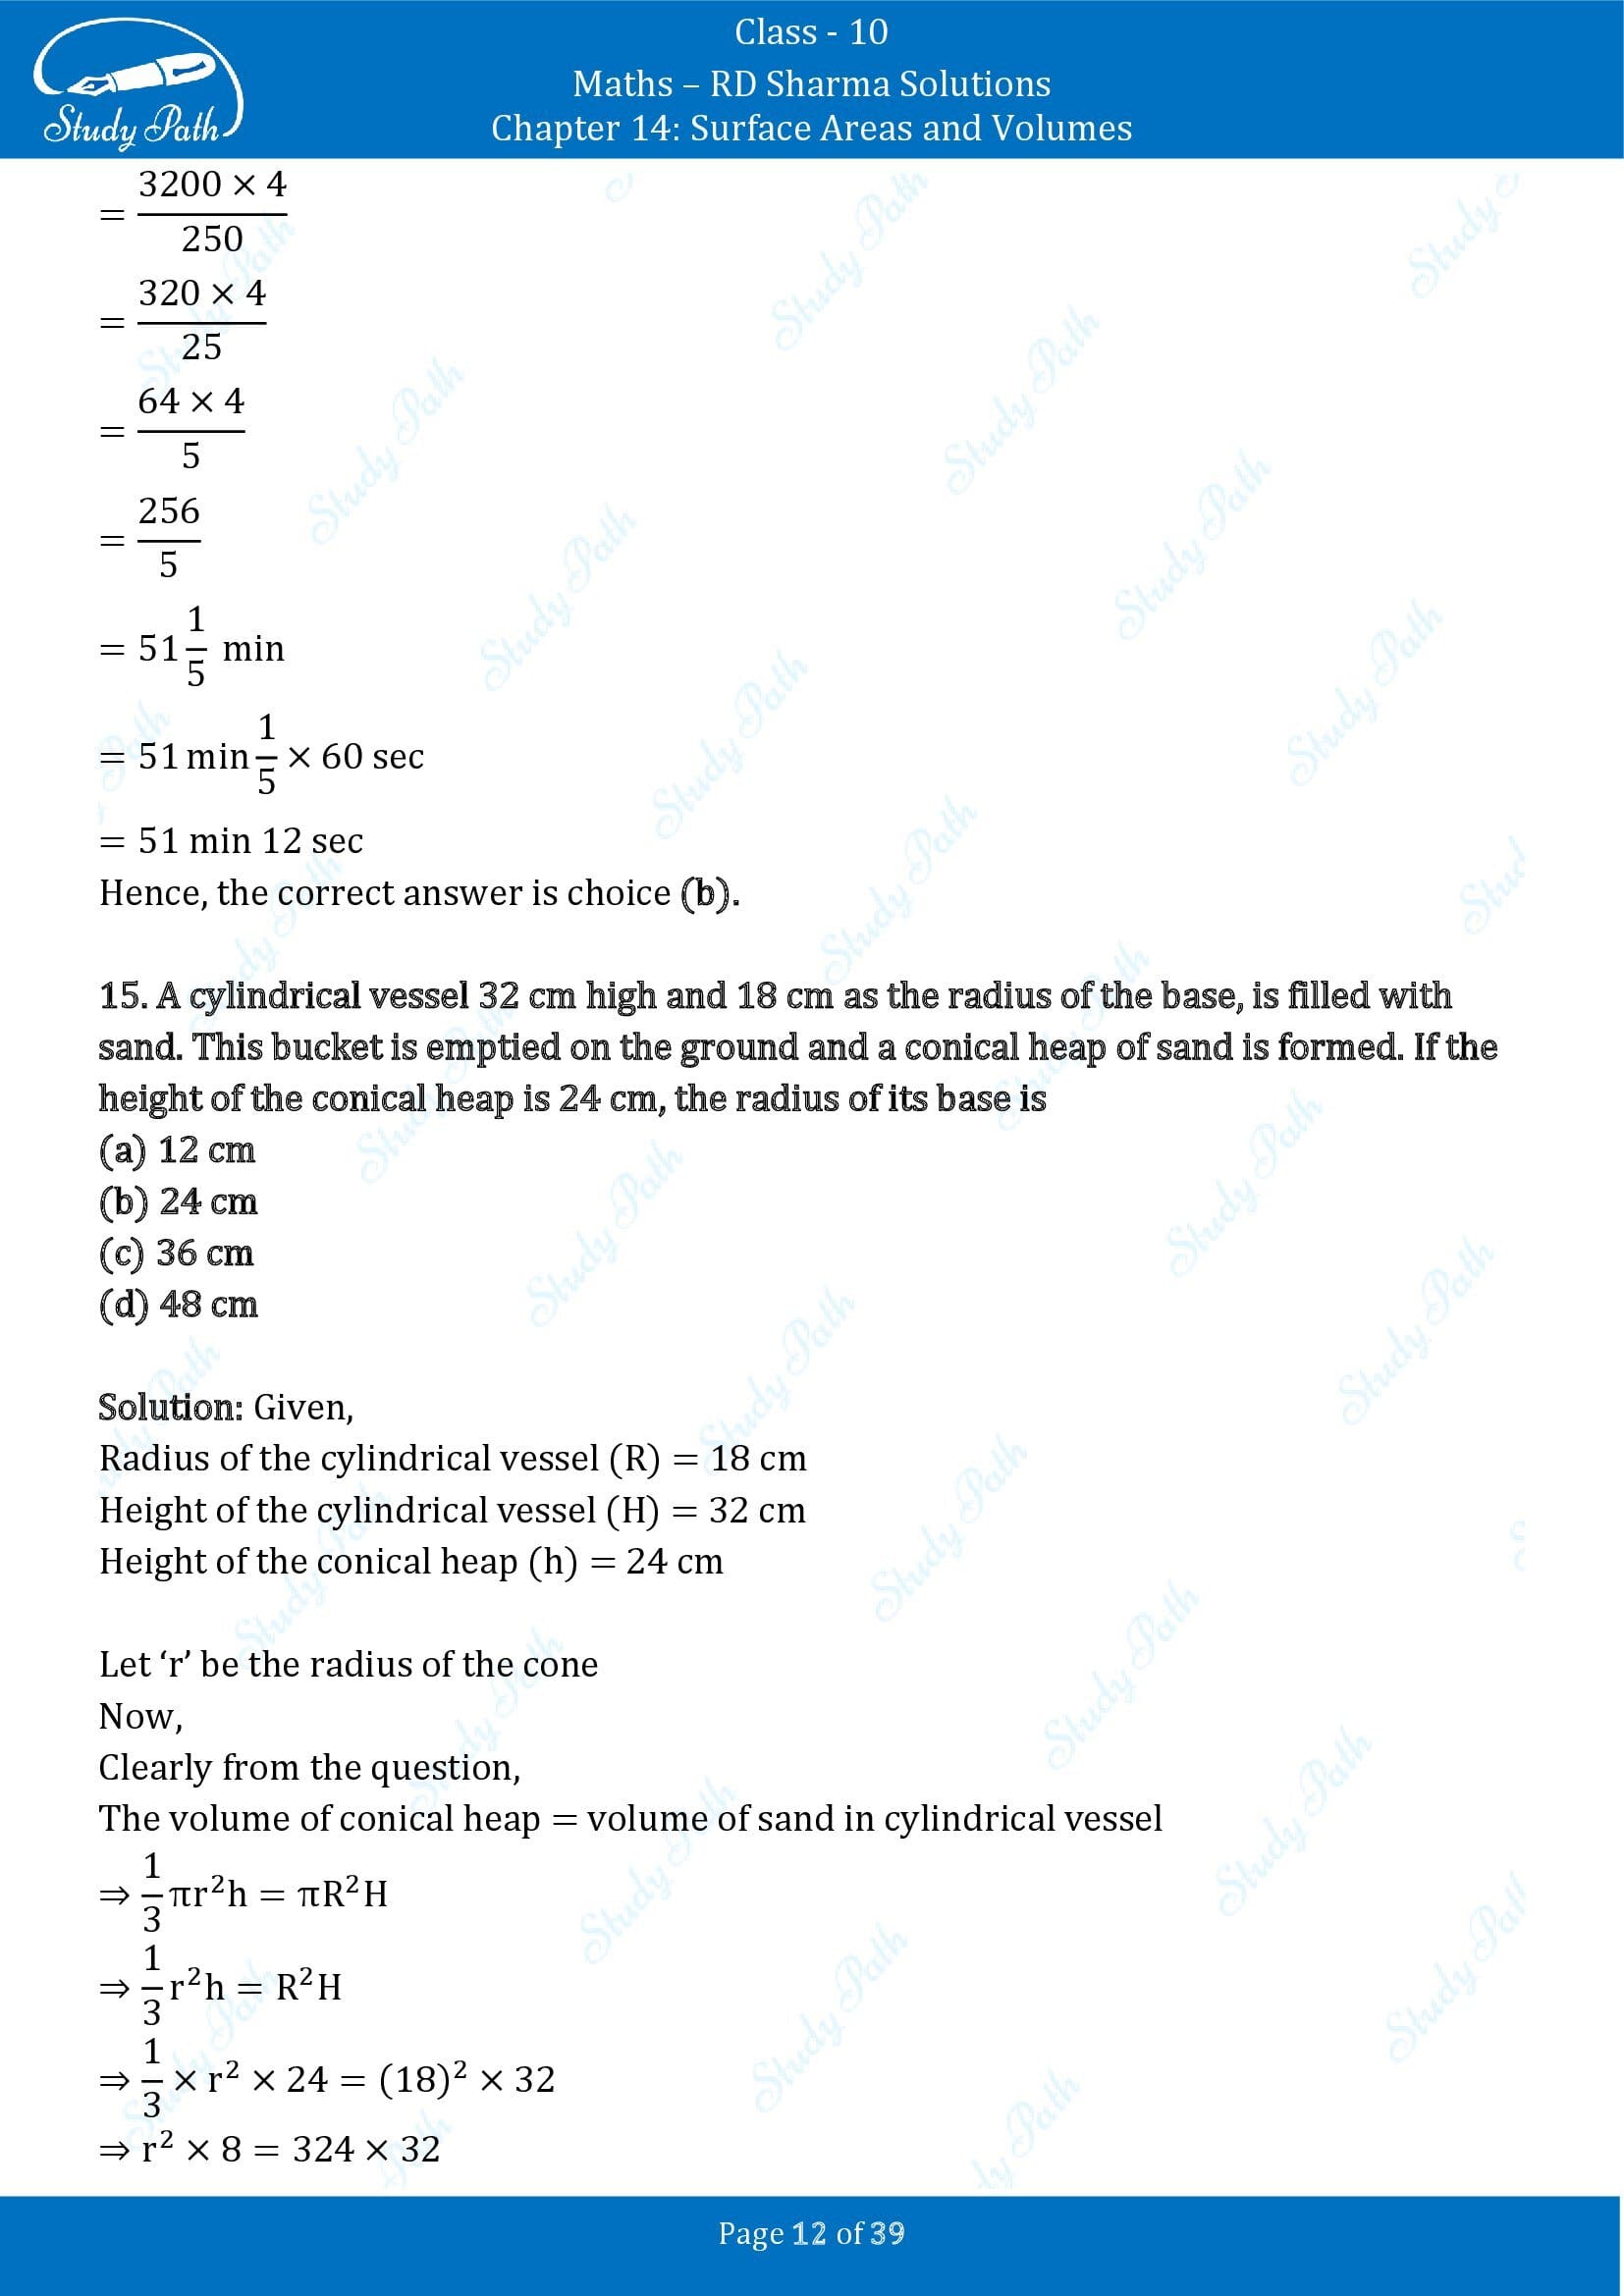 RD Sharma Solutions Class 10 Chapter 14 Surface Areas and Volumes Multiple Choice Question MCQs 00012